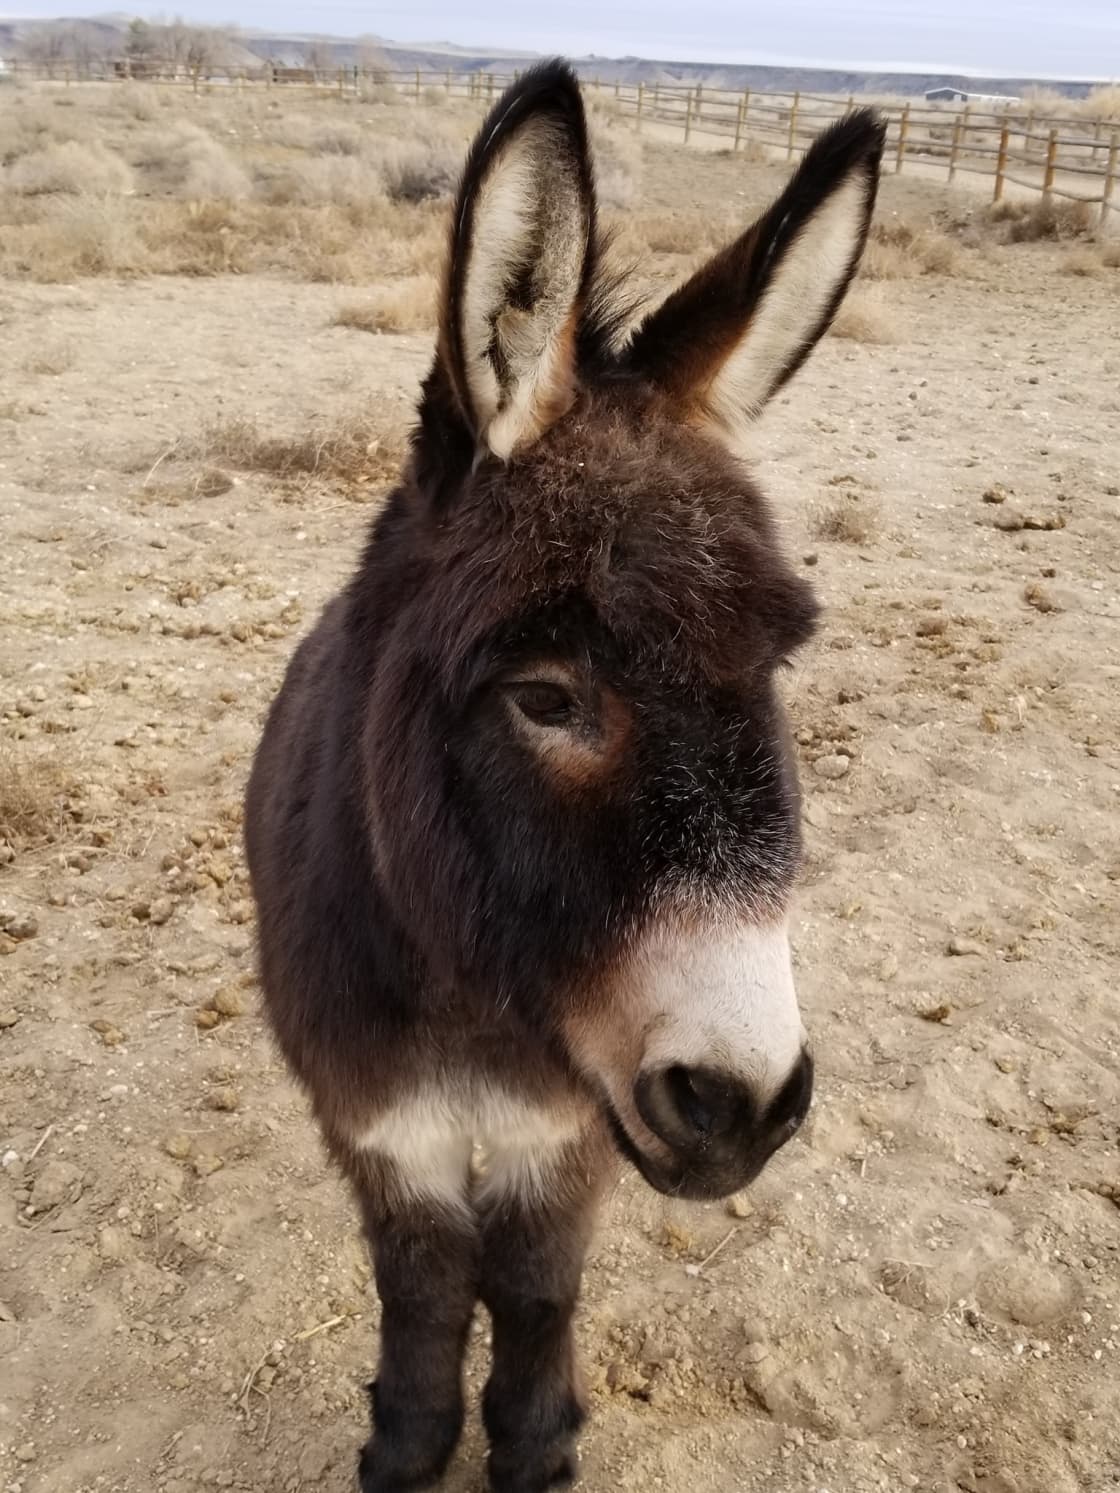 This is Sancho our miniature donkey